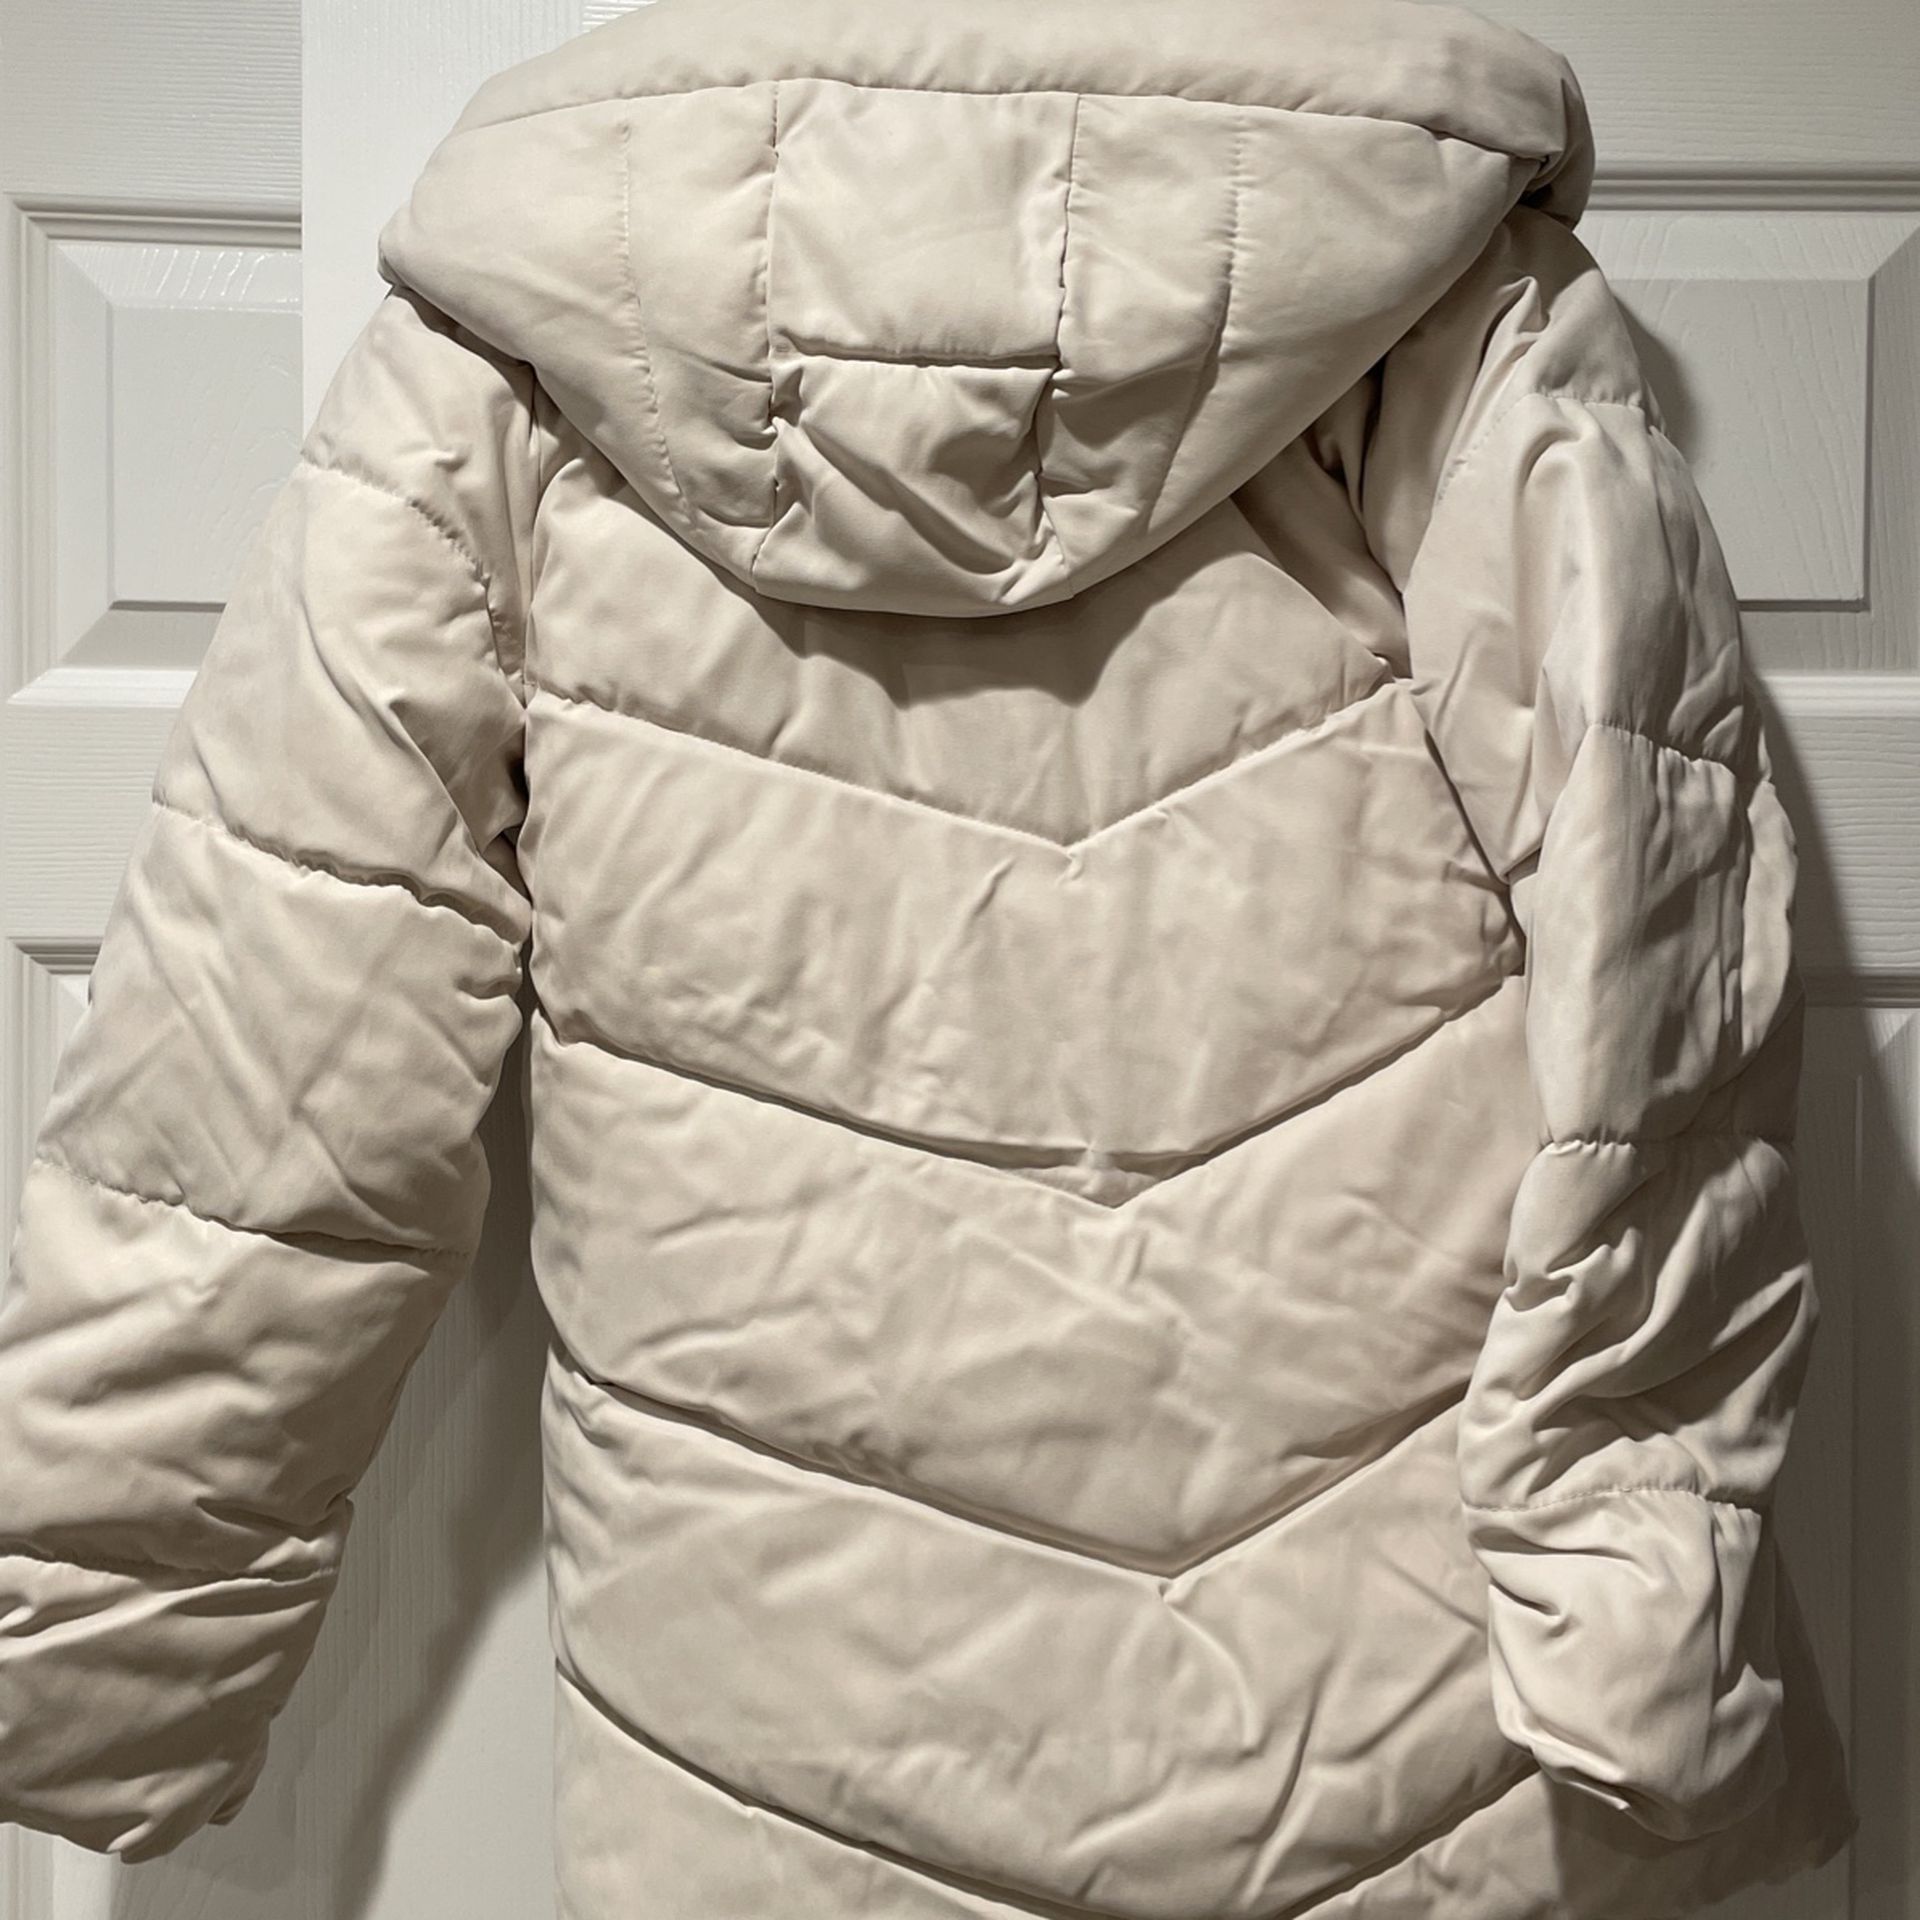 Abercrombie & Fitch Womens Puffer Jacket-new